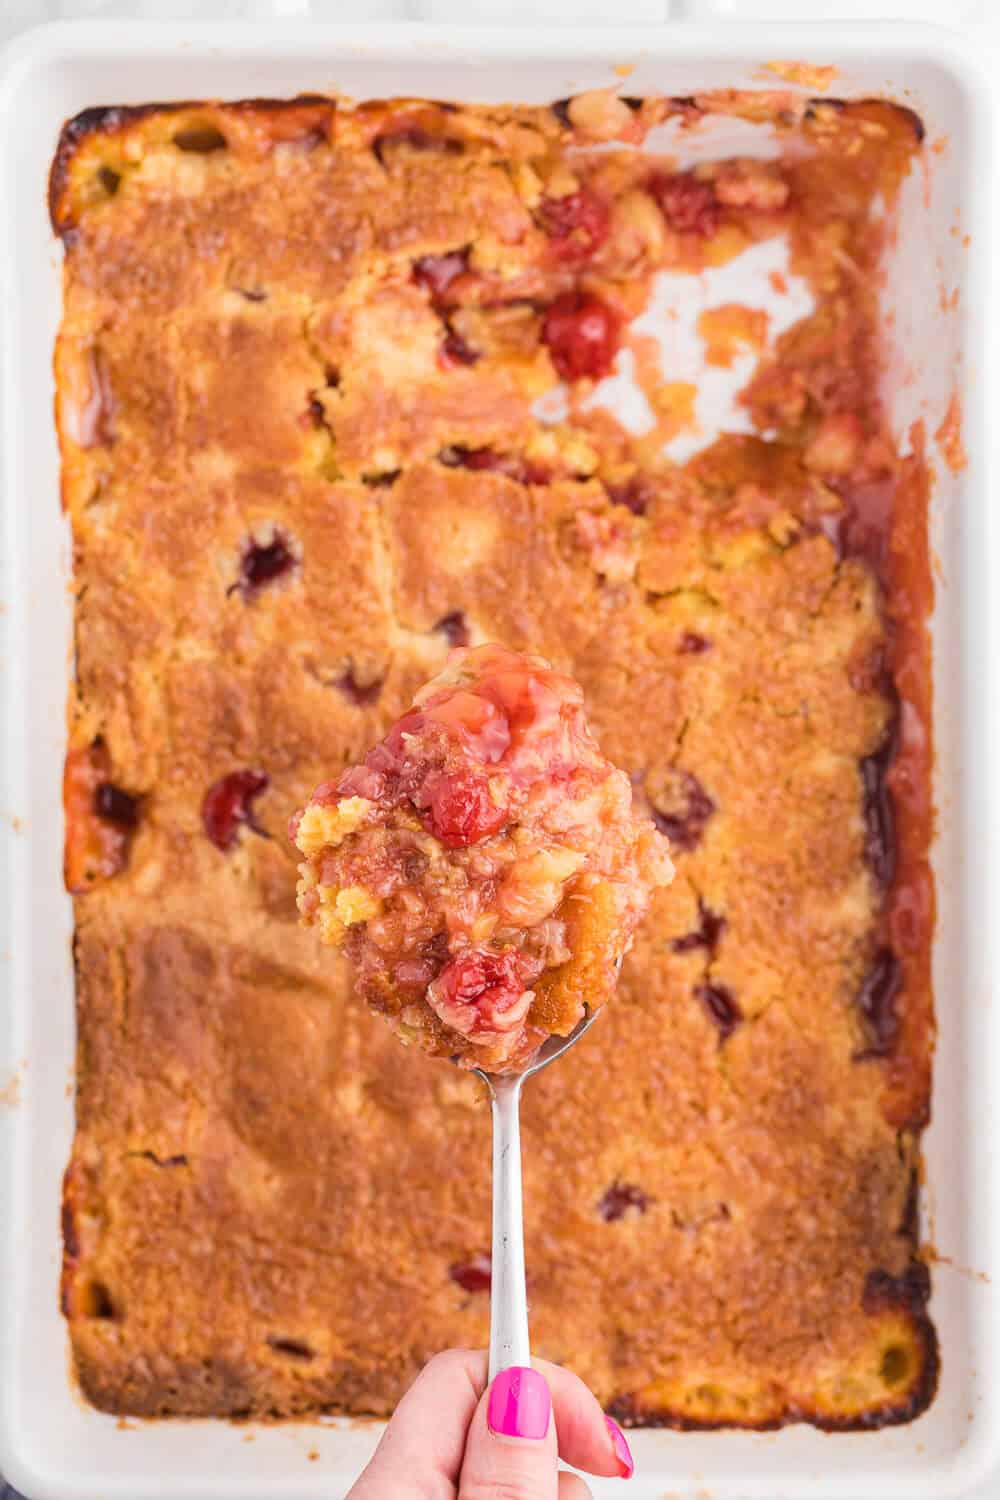 Cherry Pineapple Dump Cake Recipe - Made in 1 pan and only 4 ingredients in this quick and easy dessert recipe. Short prep time and no mixing! Perfect for potlucks and cookouts.